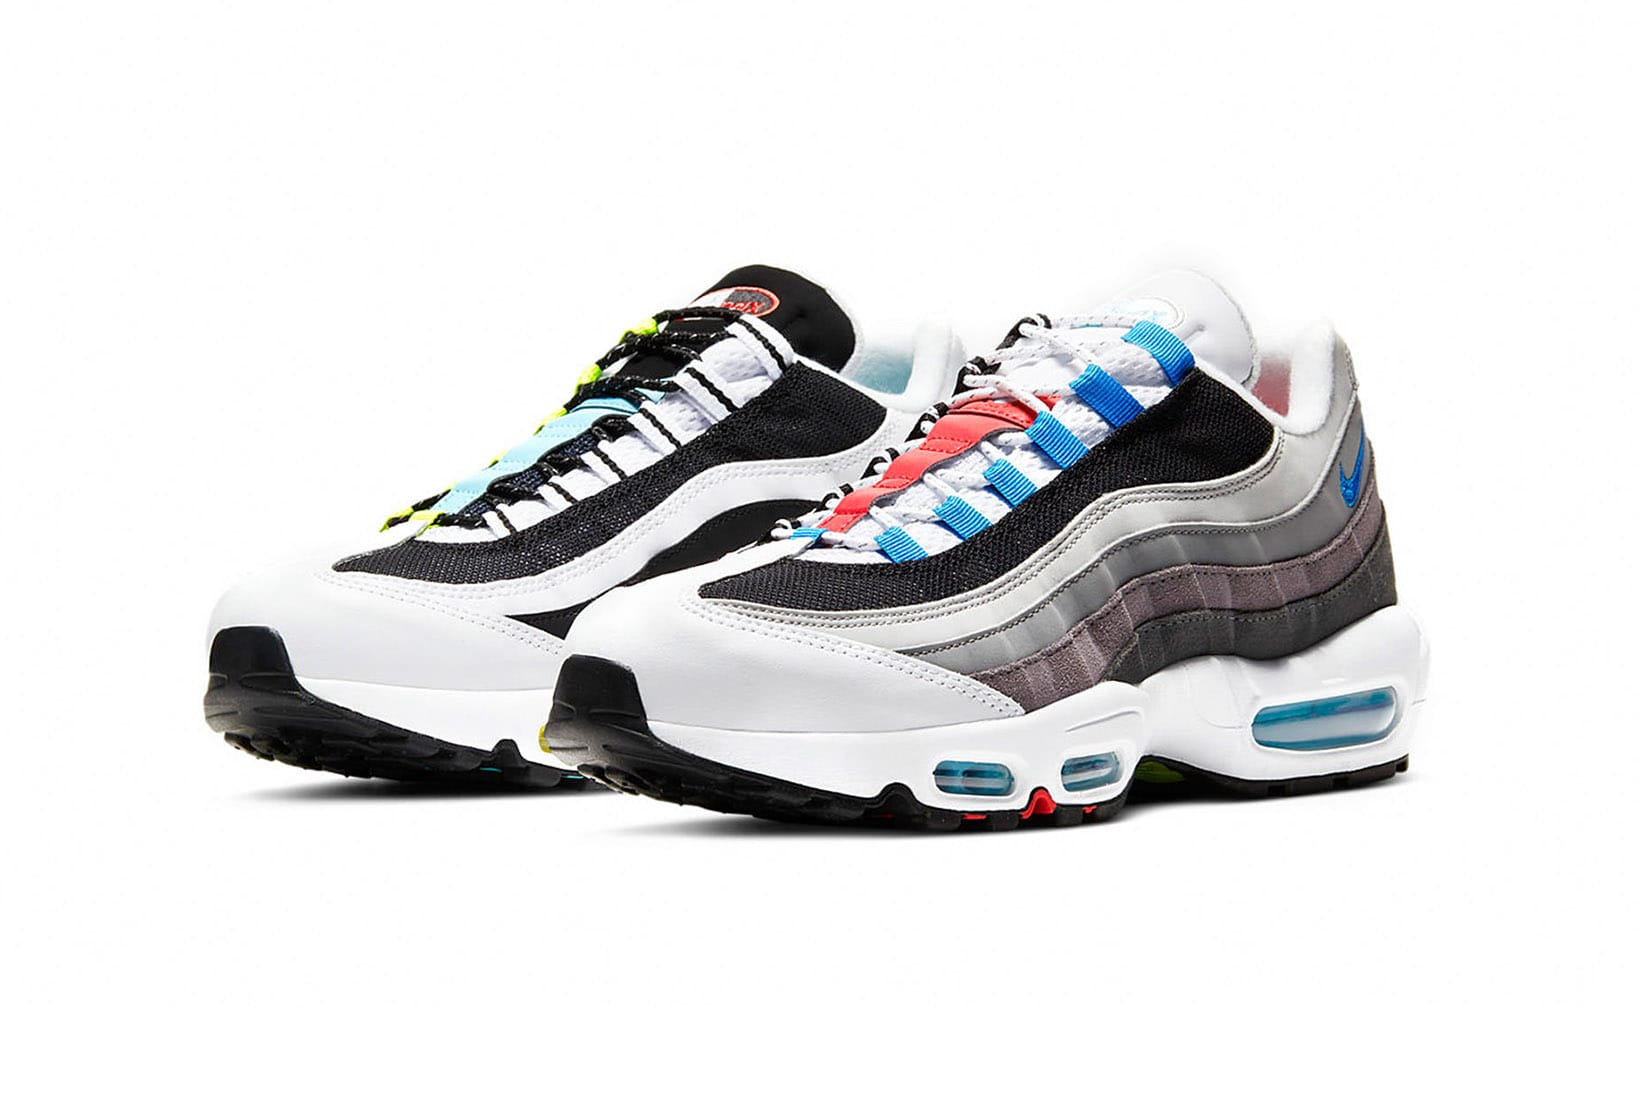 Nike Air Max 95 Returns From 2015 in 